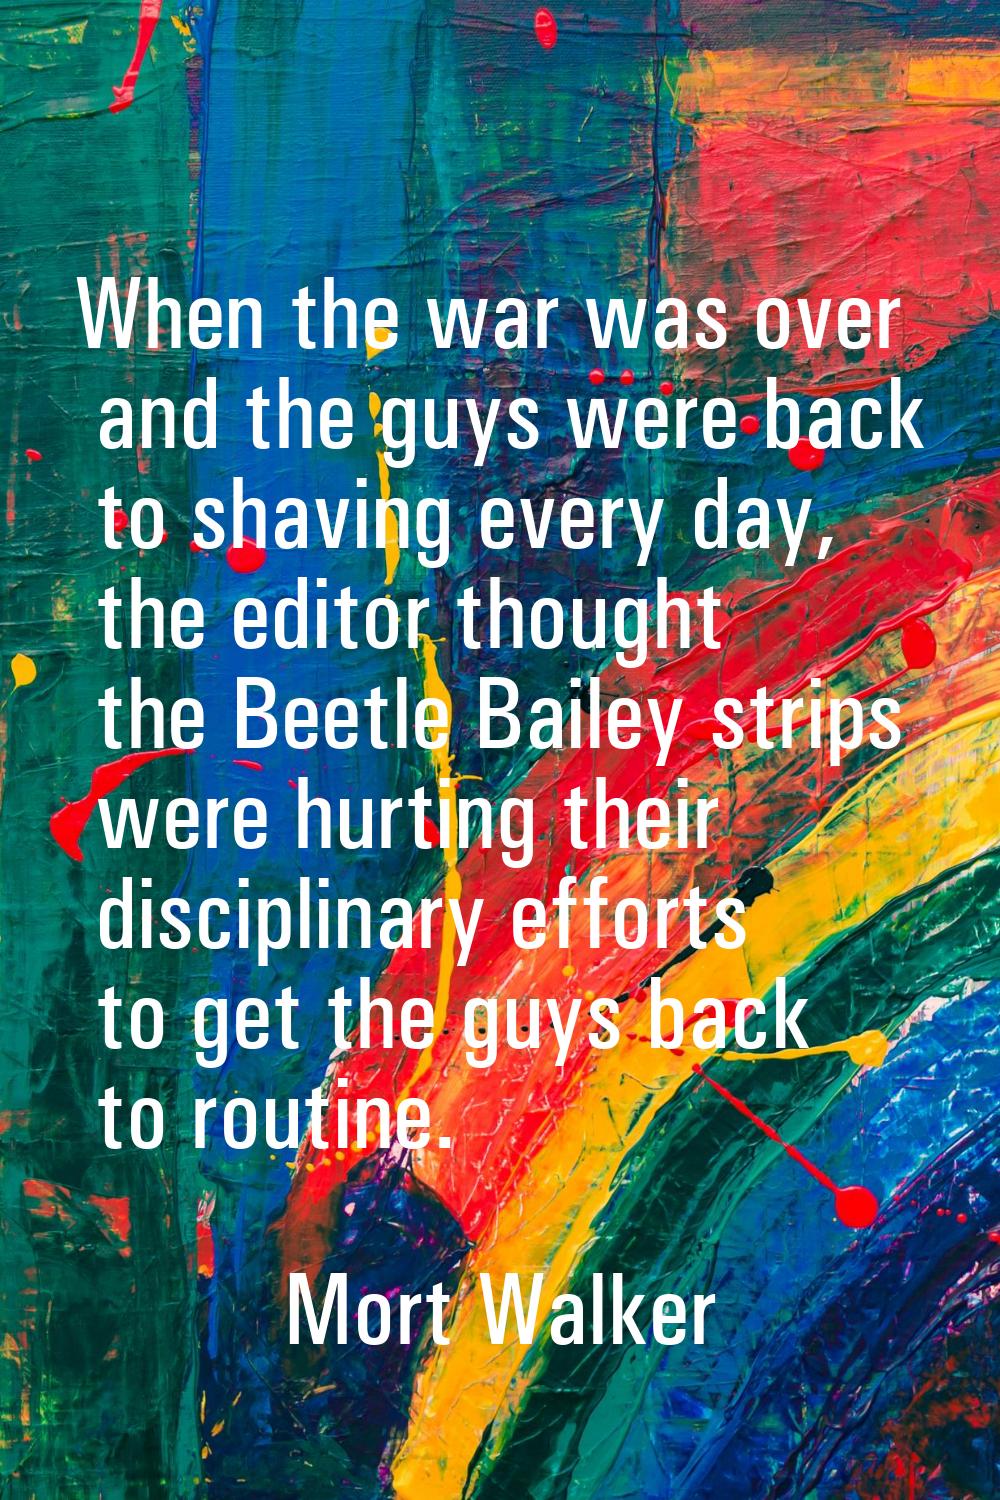 When the war was over and the guys were back to shaving every day, the editor thought the Beetle Ba